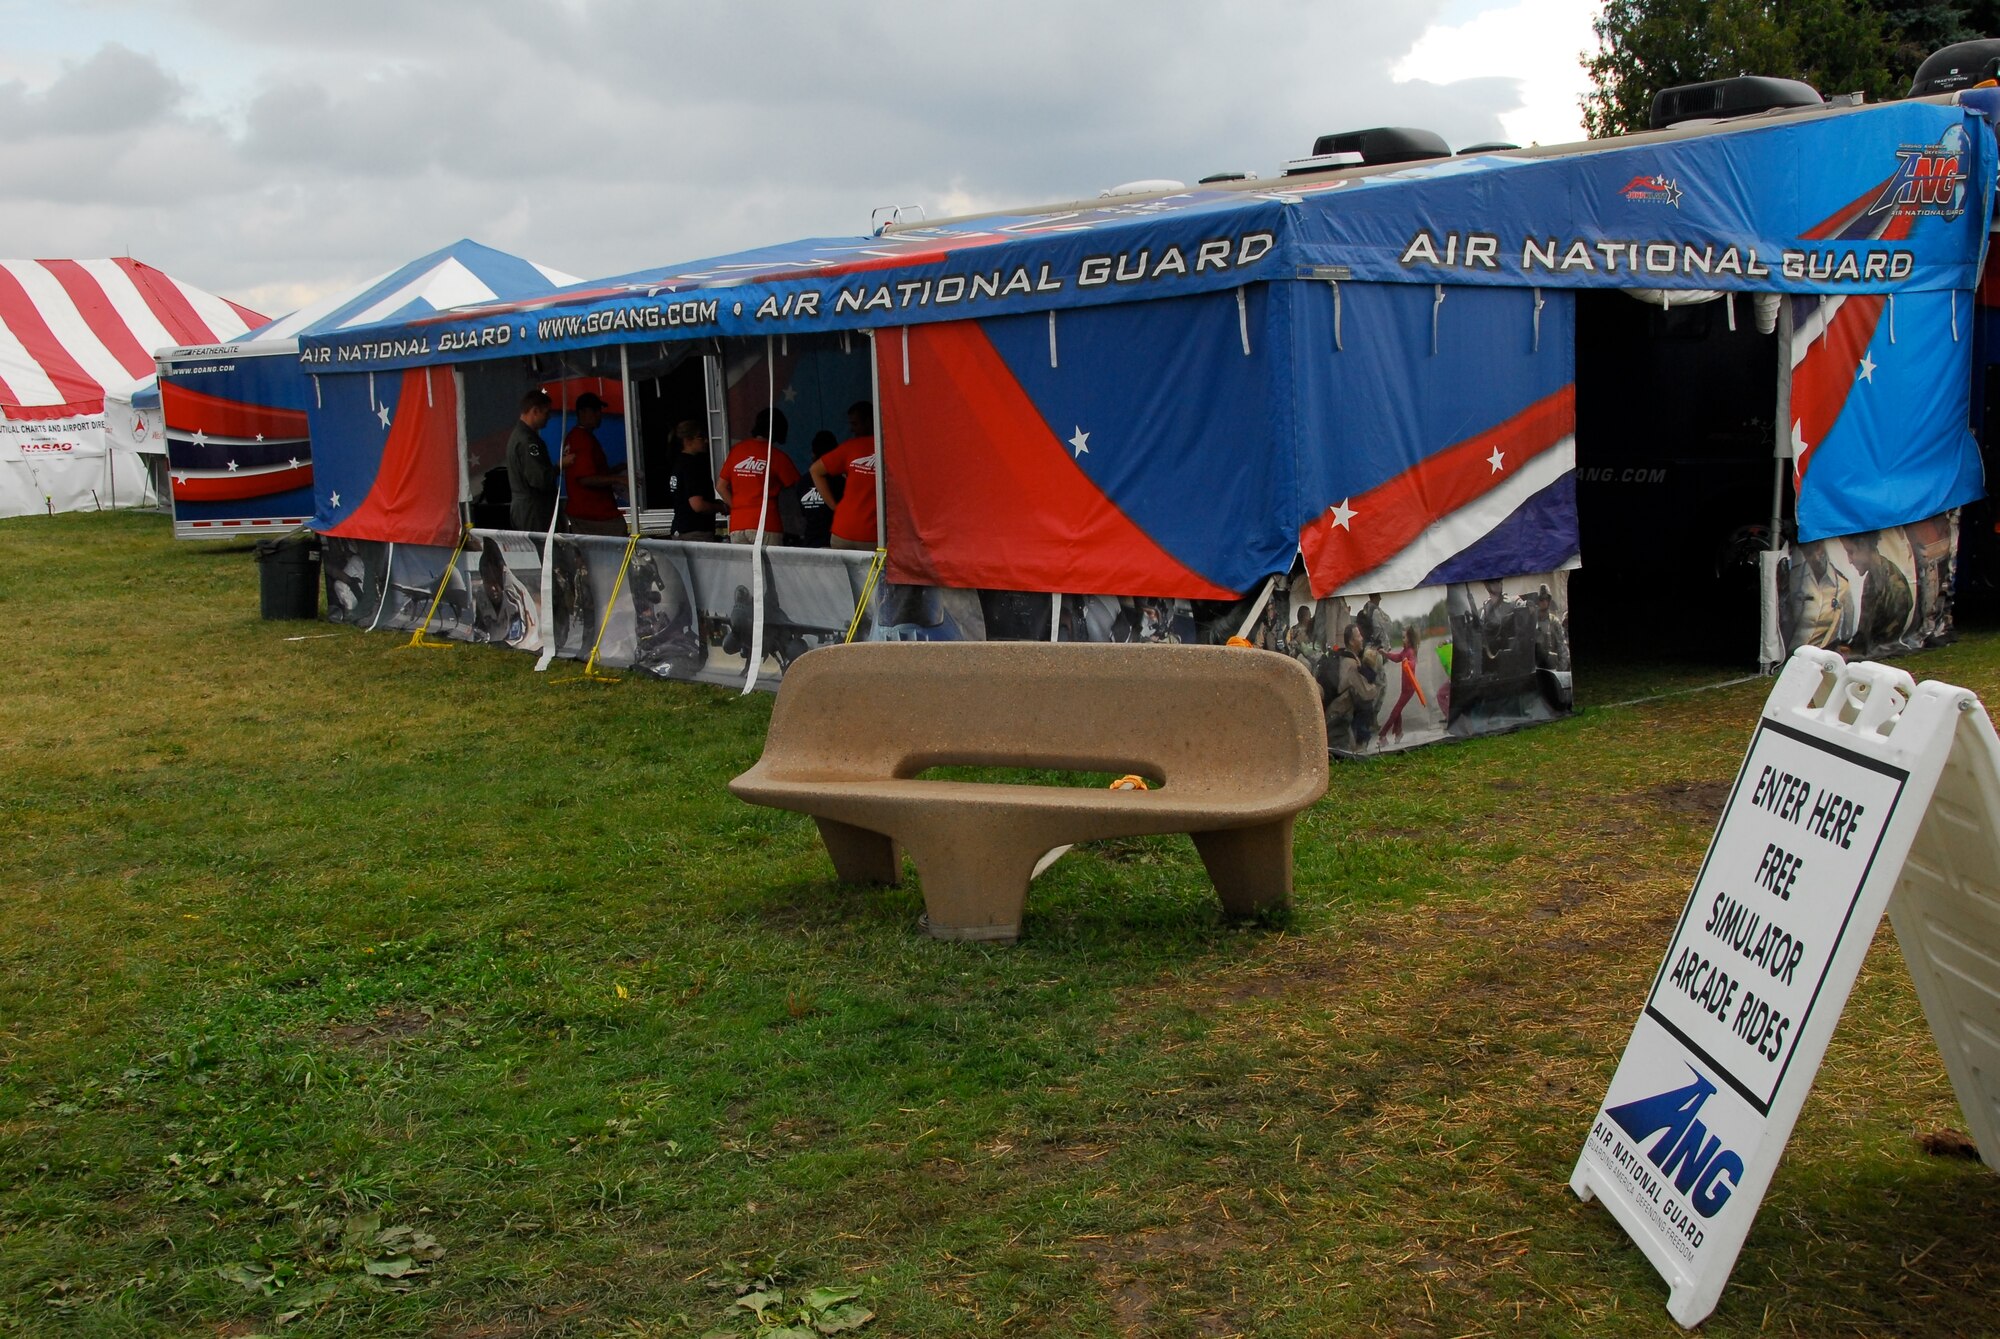 Air National Guard mobile recruiting unit on display at the Experimental Aviation Association AirVenture in Oshkosh, Wis.   (U.S. Air Force photo by Tech. Sgt. Don Nelson, 115 FW/PA)